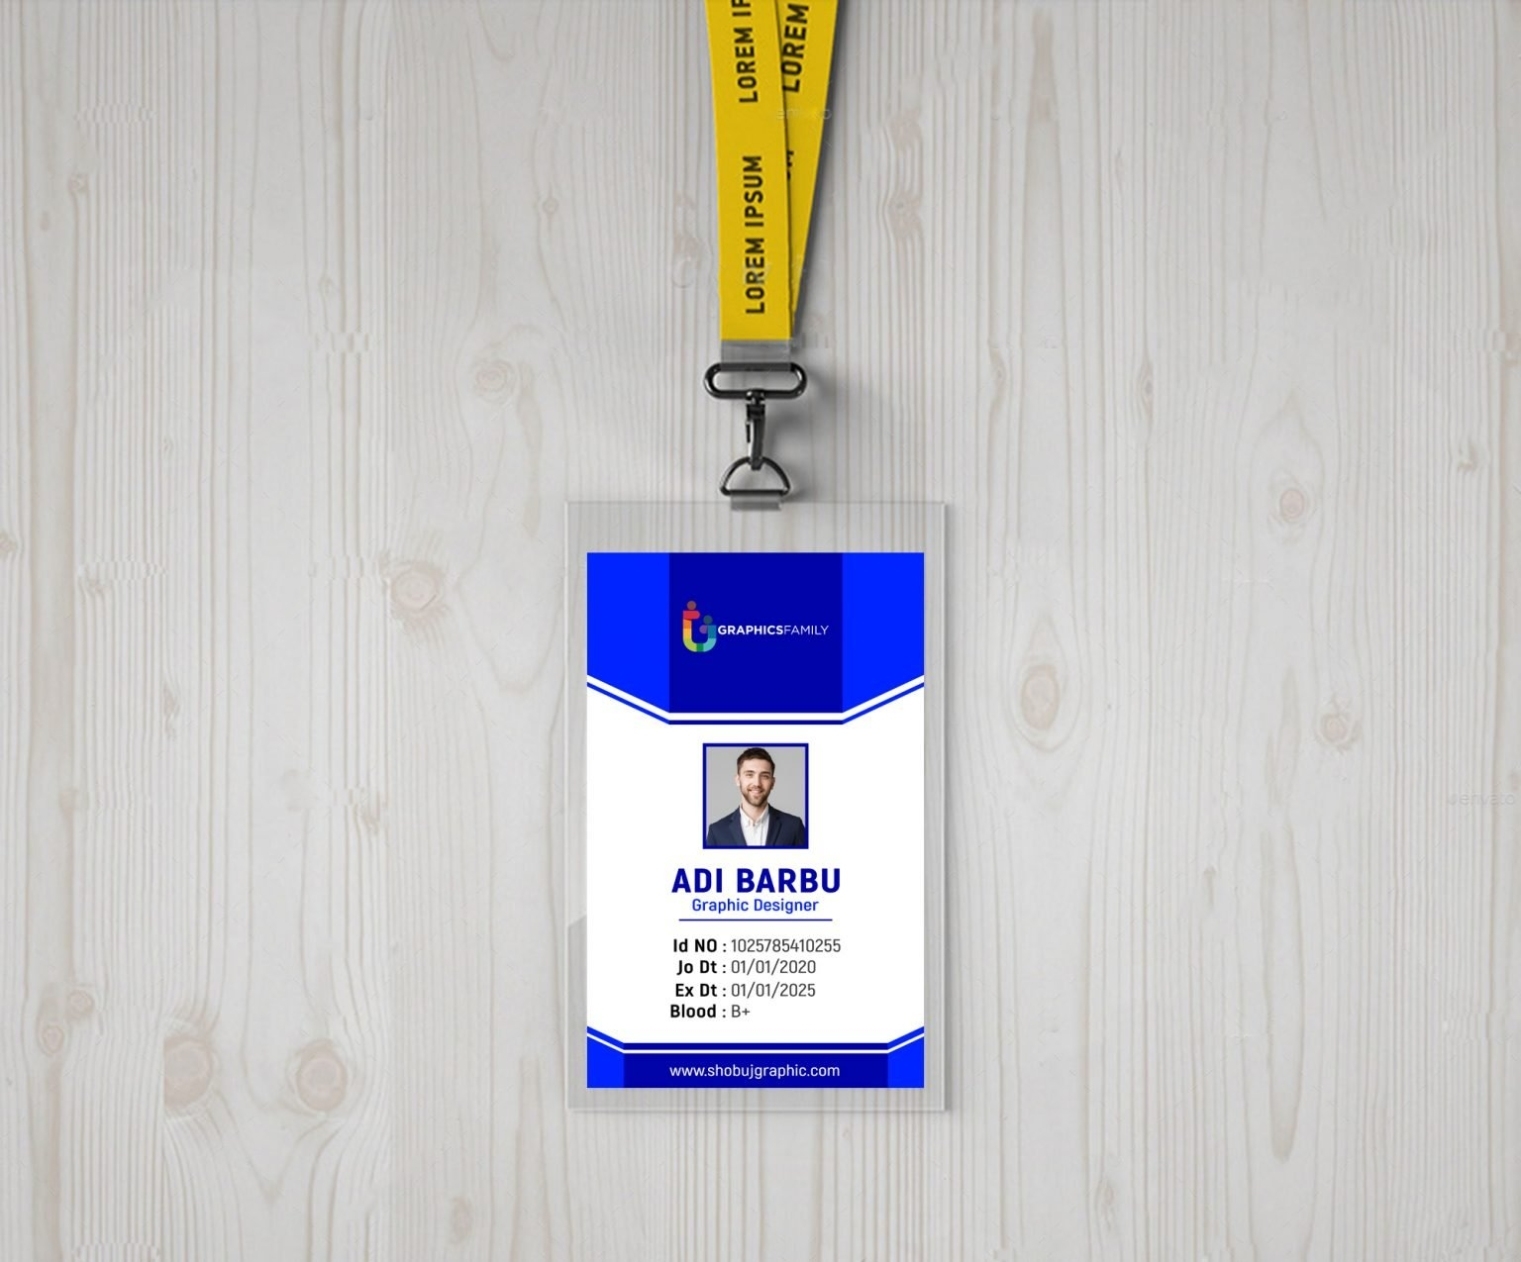 Flat Office Id Card Design Template Free Psd – Graphicsfamily Pertaining To Id Card Design Template Psd Free Download